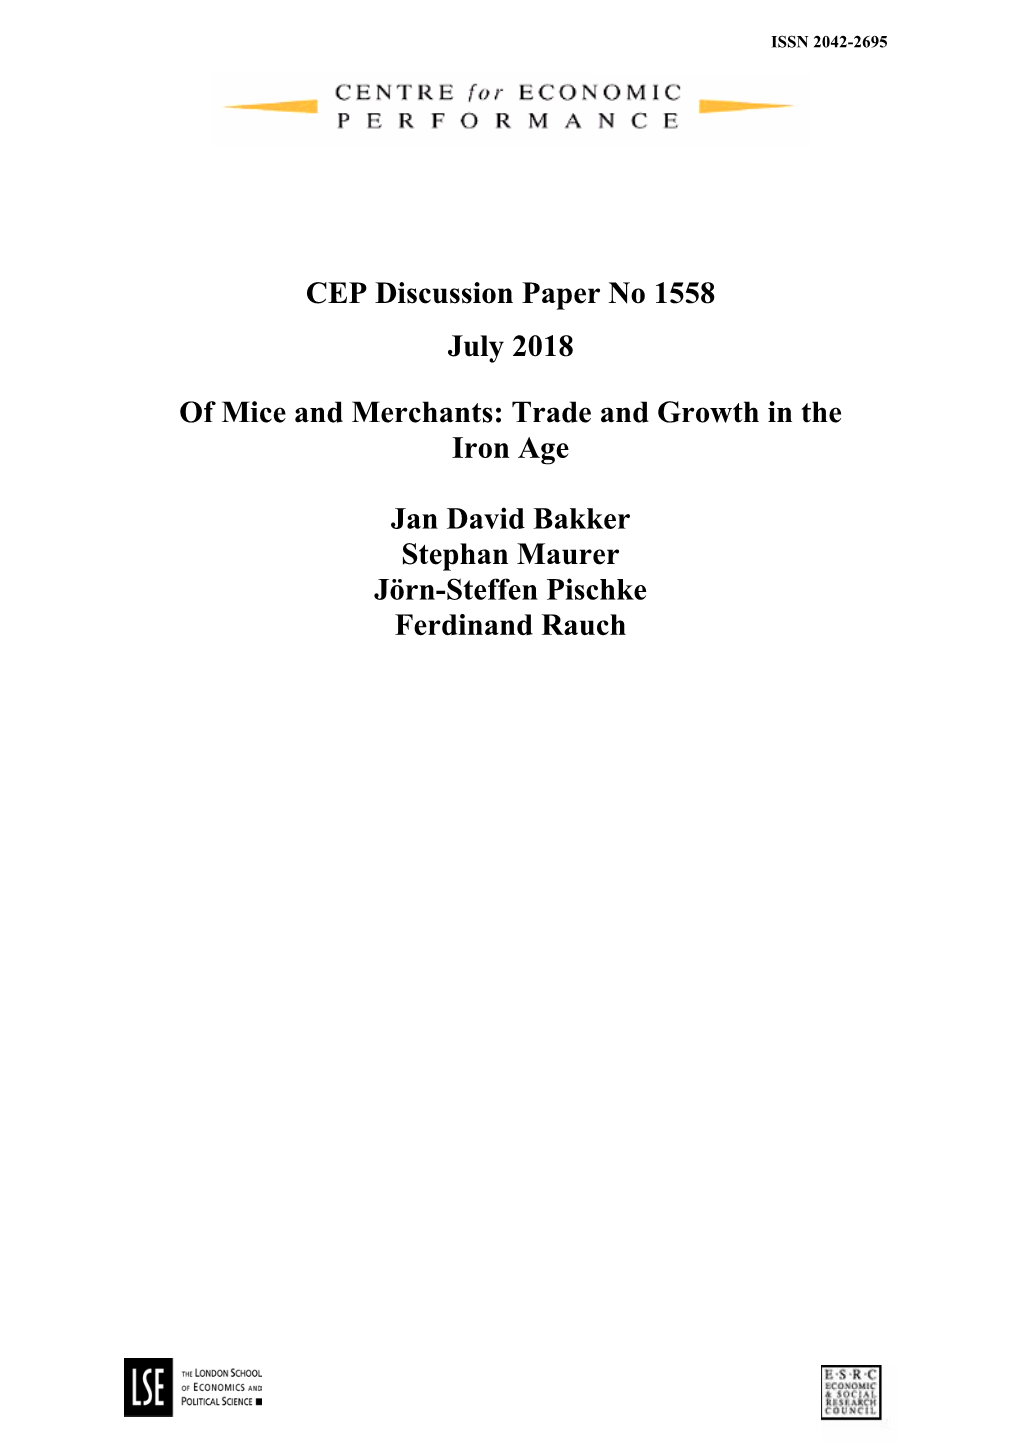 CEP Discussion Paper No 1558 July 2018 of Mice and Merchants: Trade